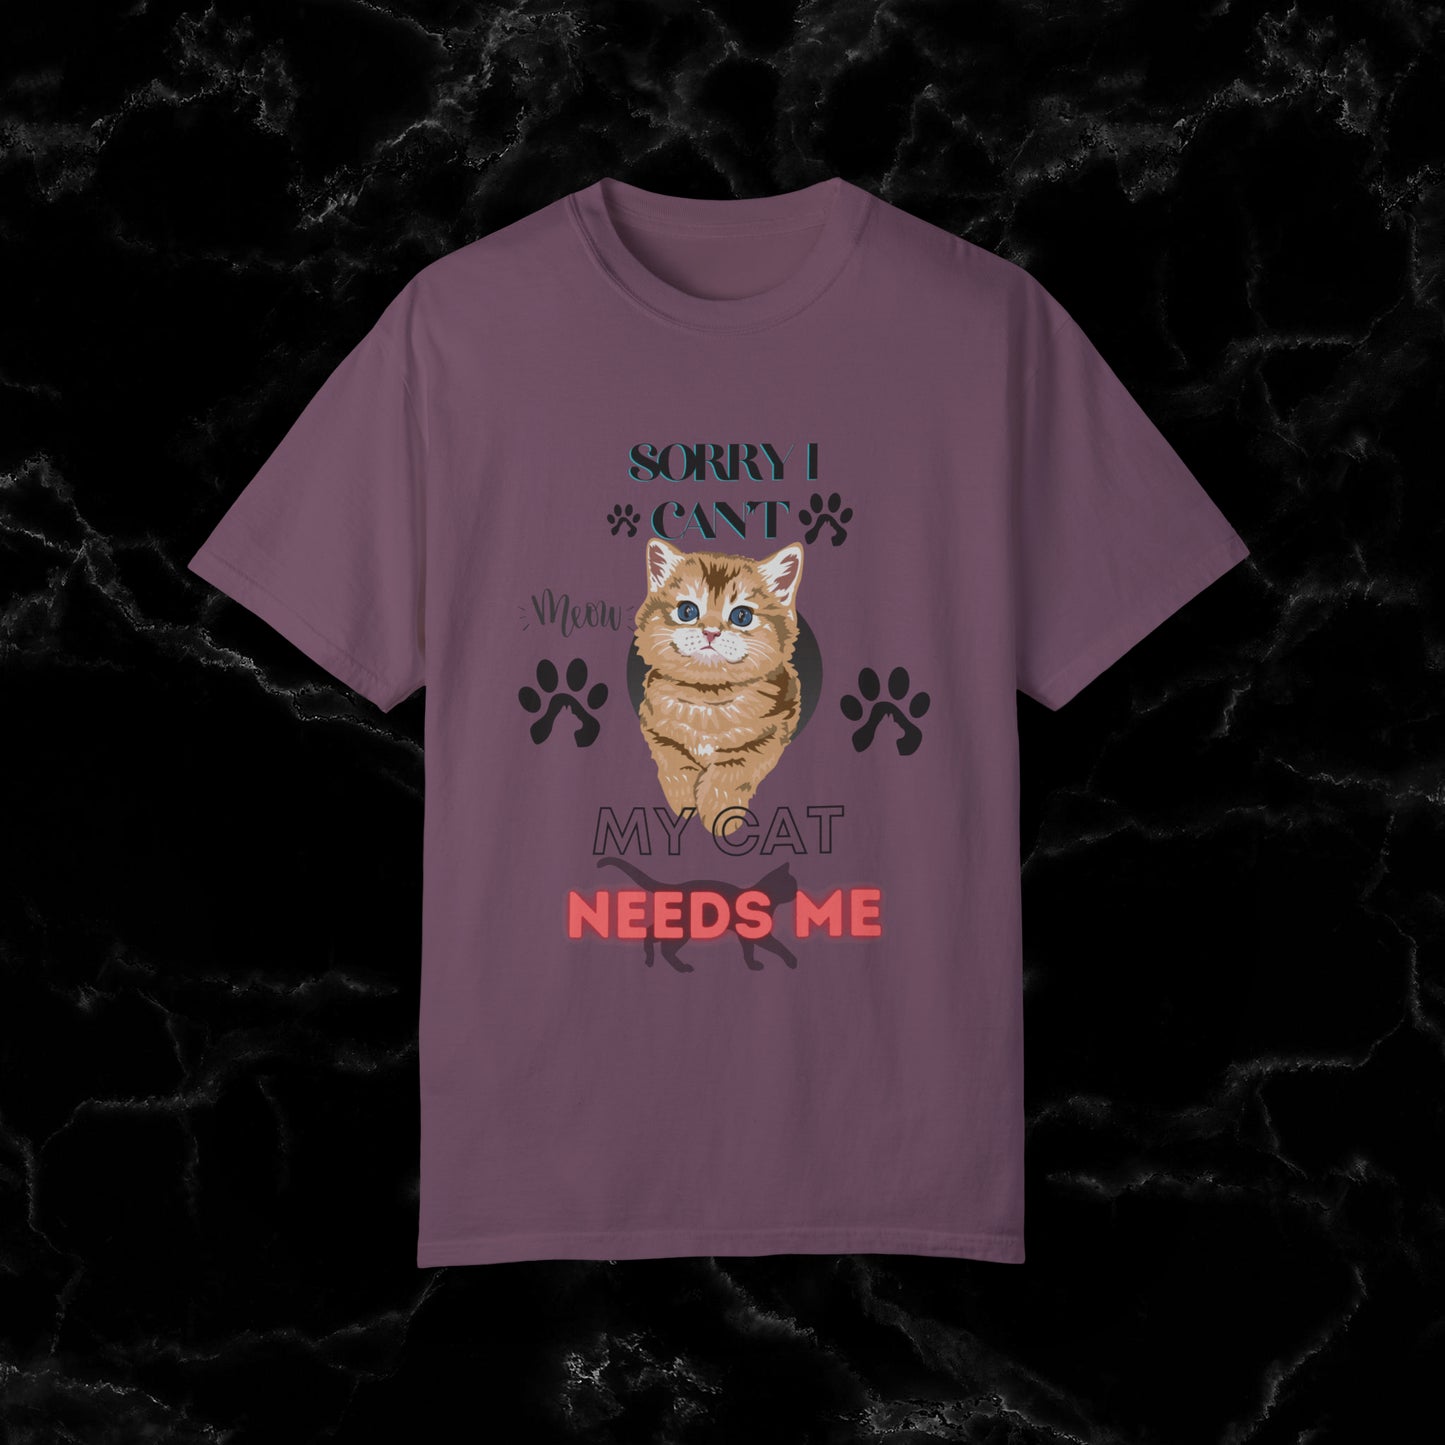 Sorry I Can't, My Cat Needs Me T-Shirt - Perfect Gift for Cat Moms and Animal Lovers T-Shirt Berry S 